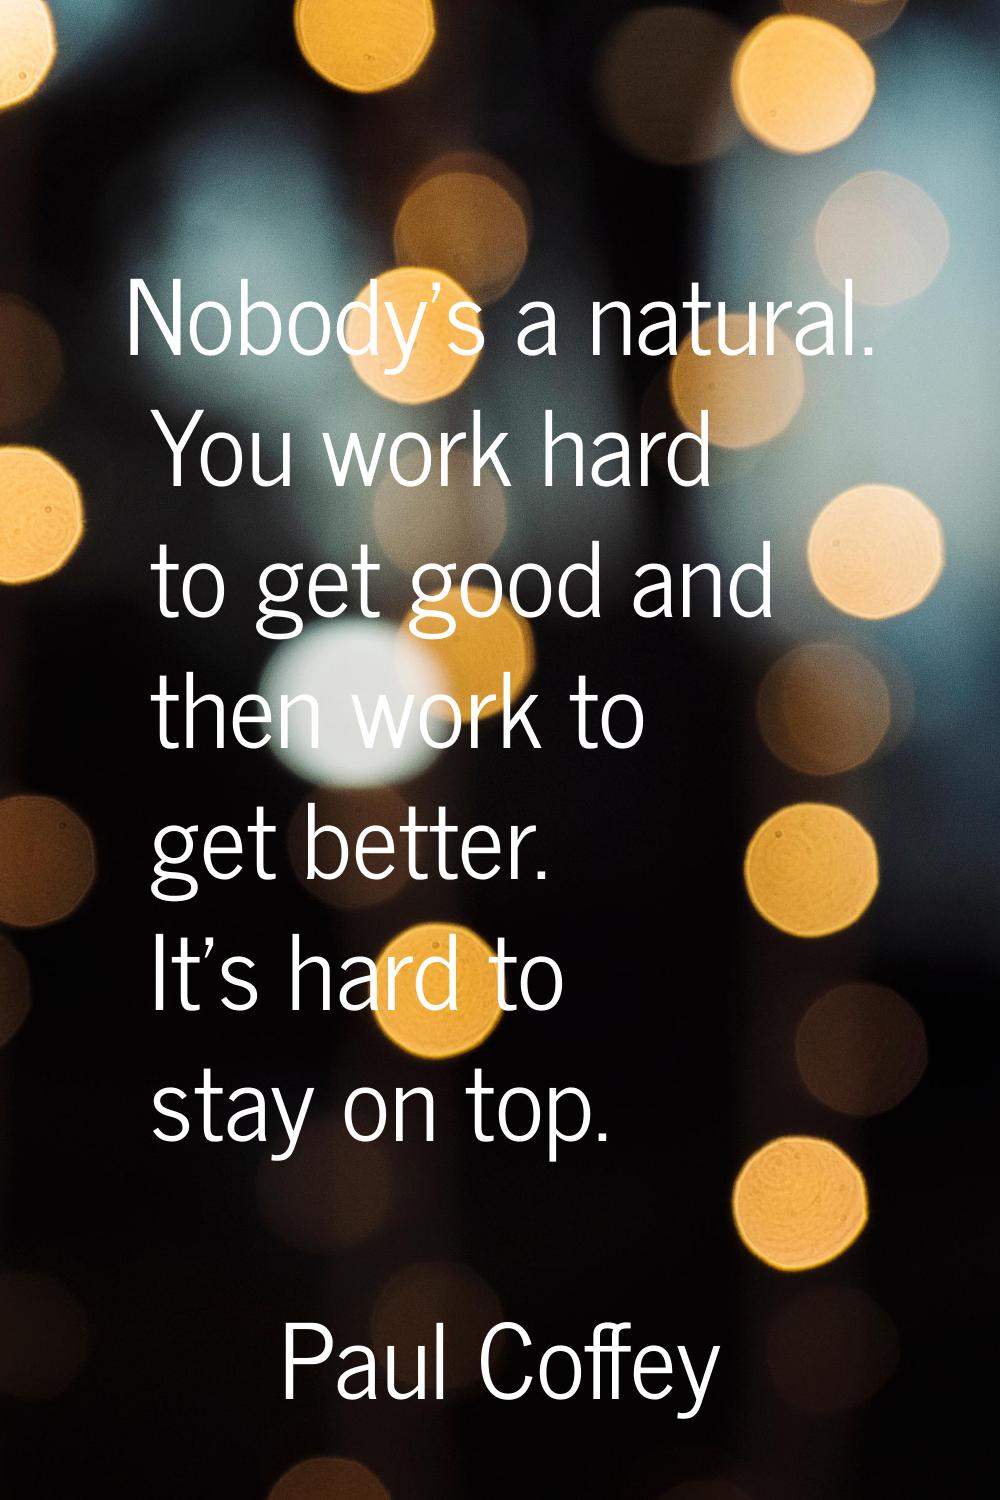 Nobody's a natural. You work hard to get good and then work to get better. It's hard to stay on top